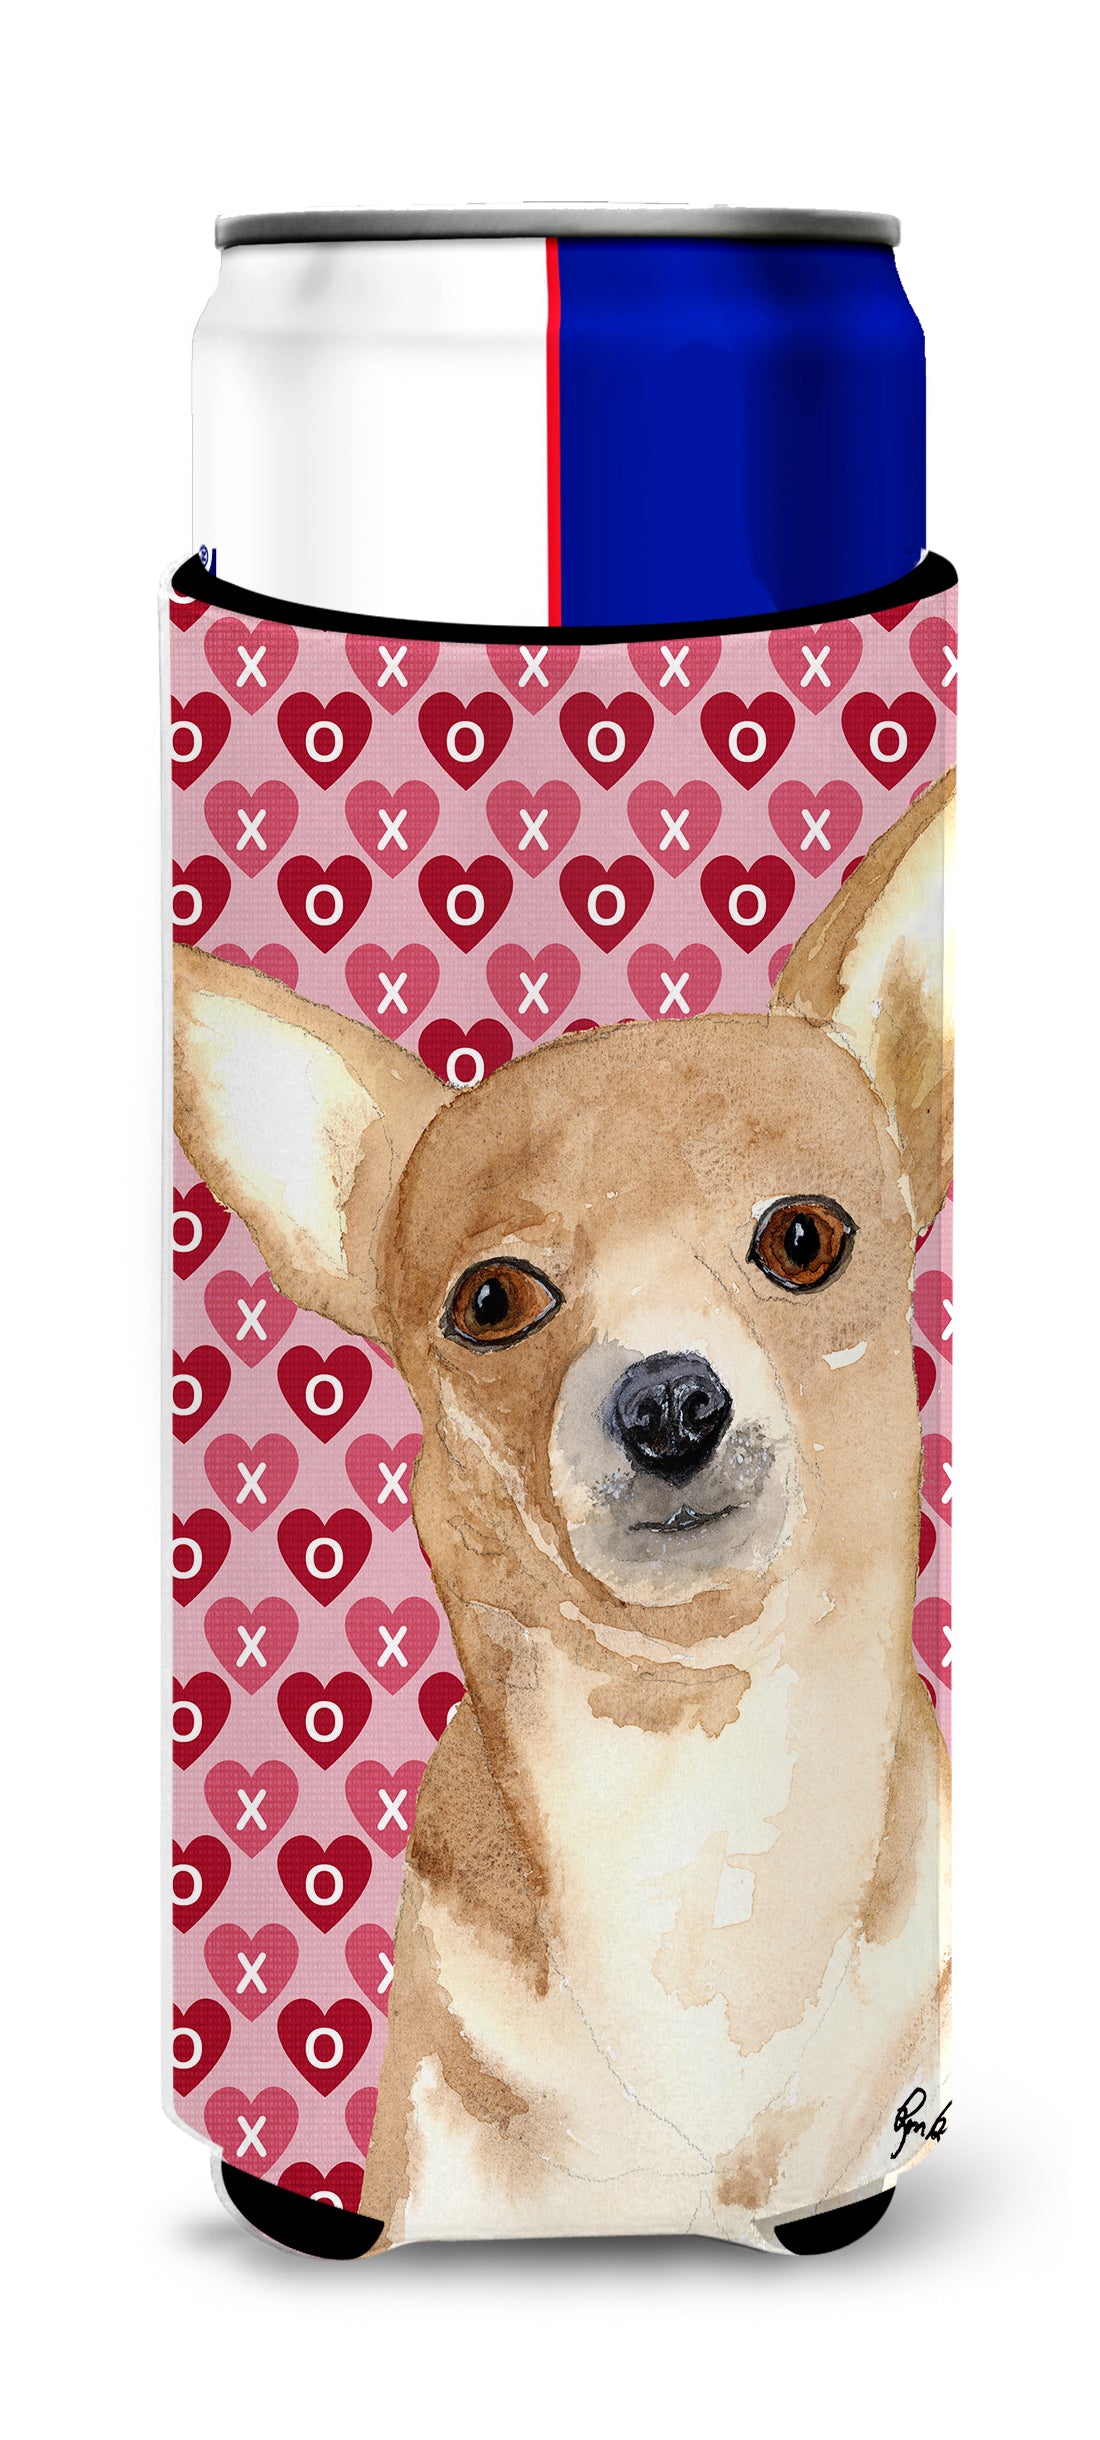 Chihuahua Love and Hearts Ultra Beverage Insulators for slim cans  RDR3014MUK